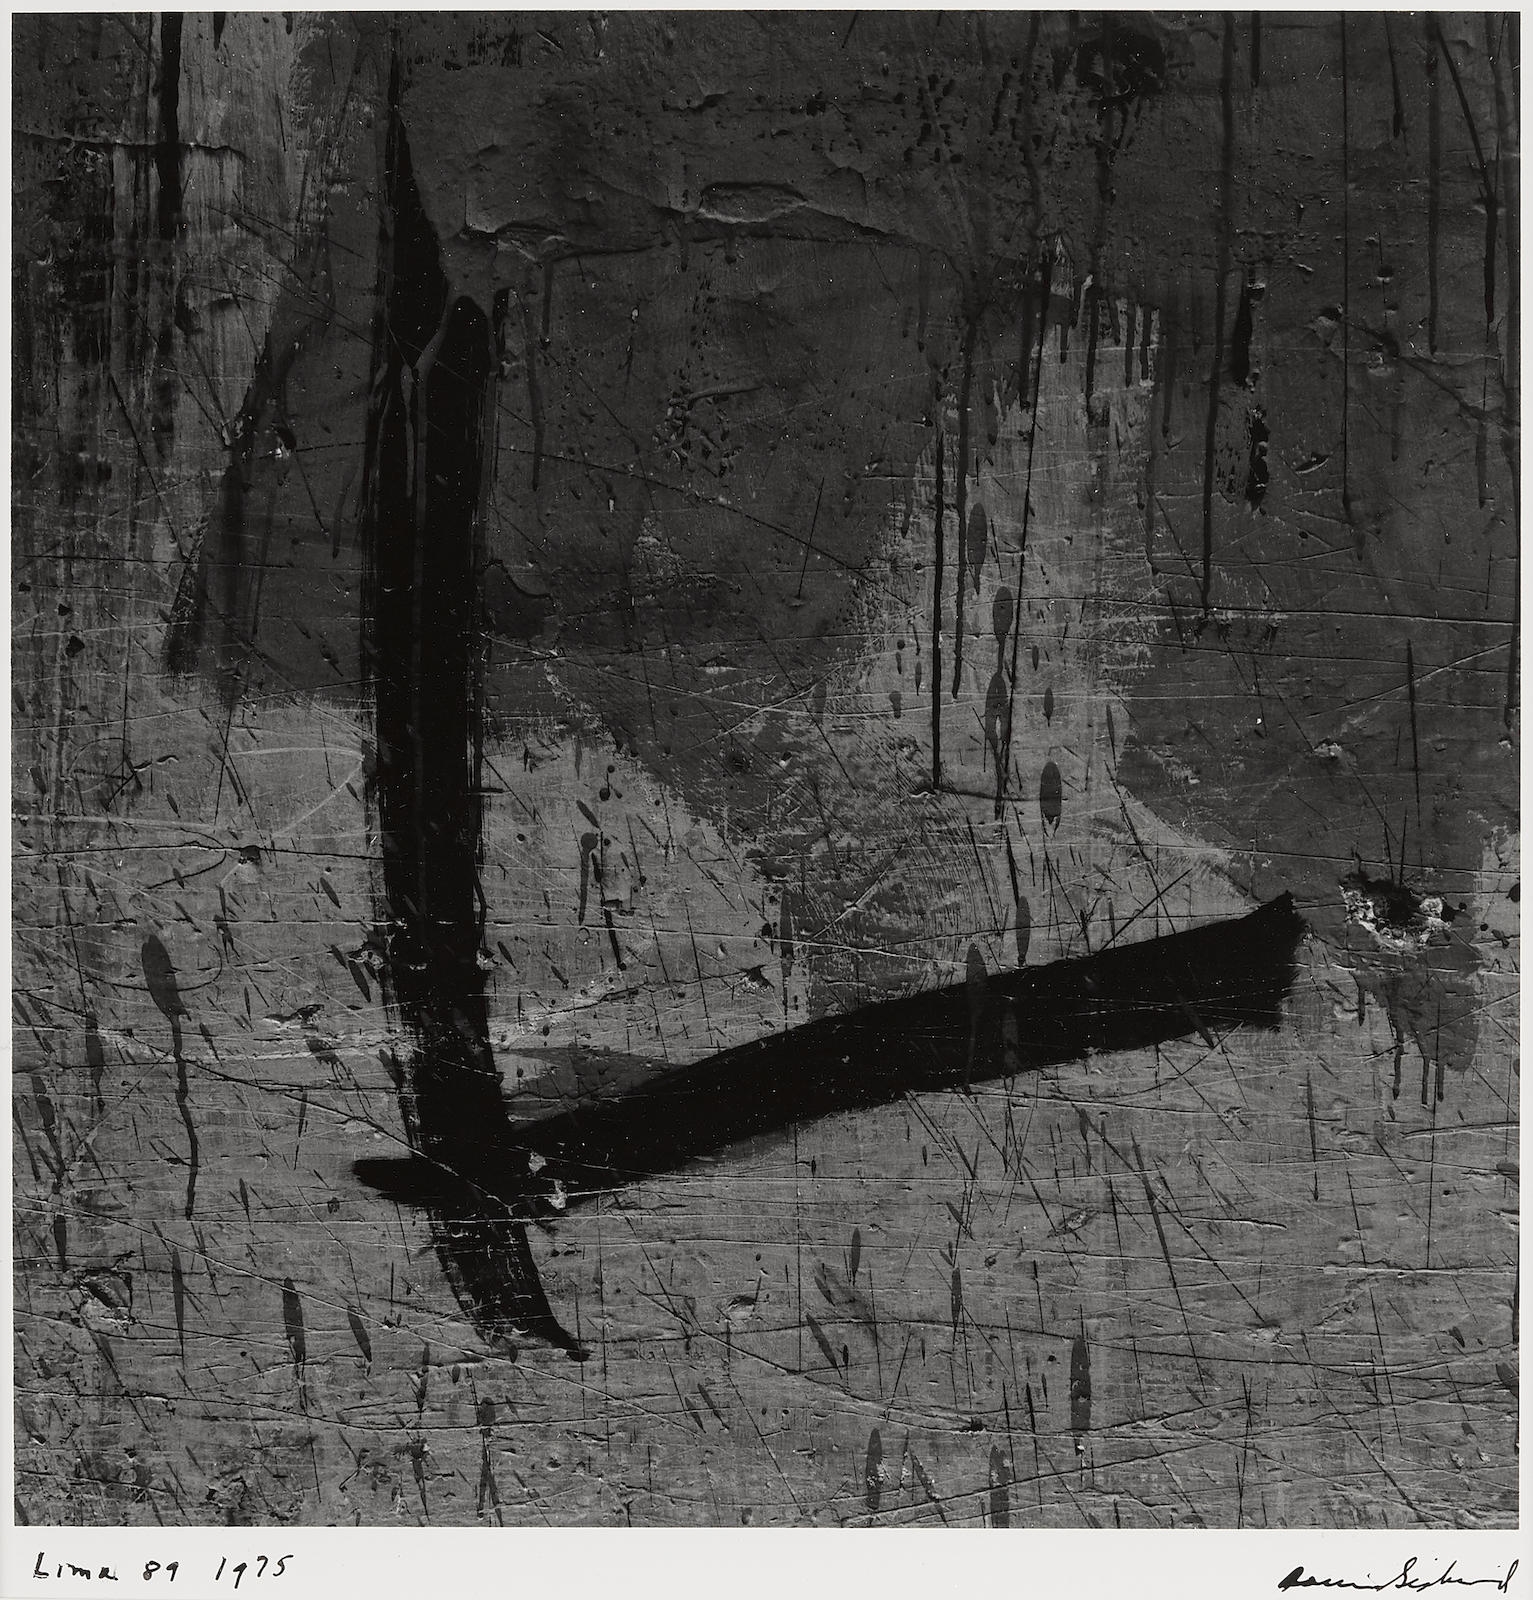 Lima 89 by Aaron Siskind, 1975